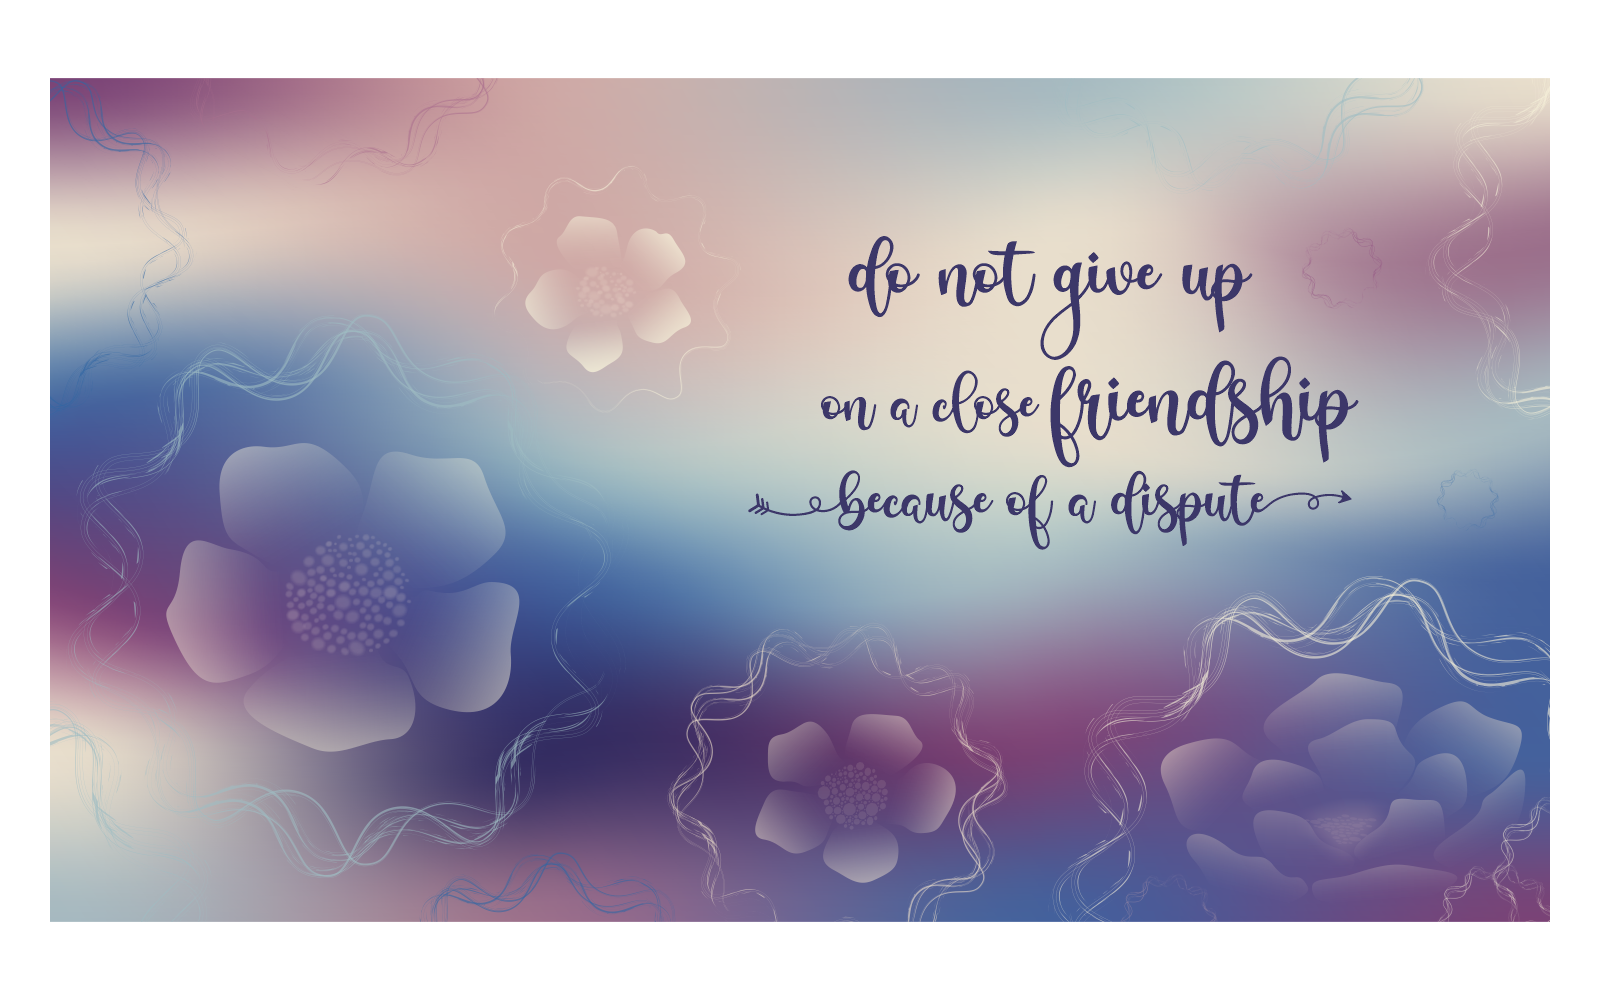 Multi-color Inspirational Background Image 14400x8100px with Message of Respecting Friendship